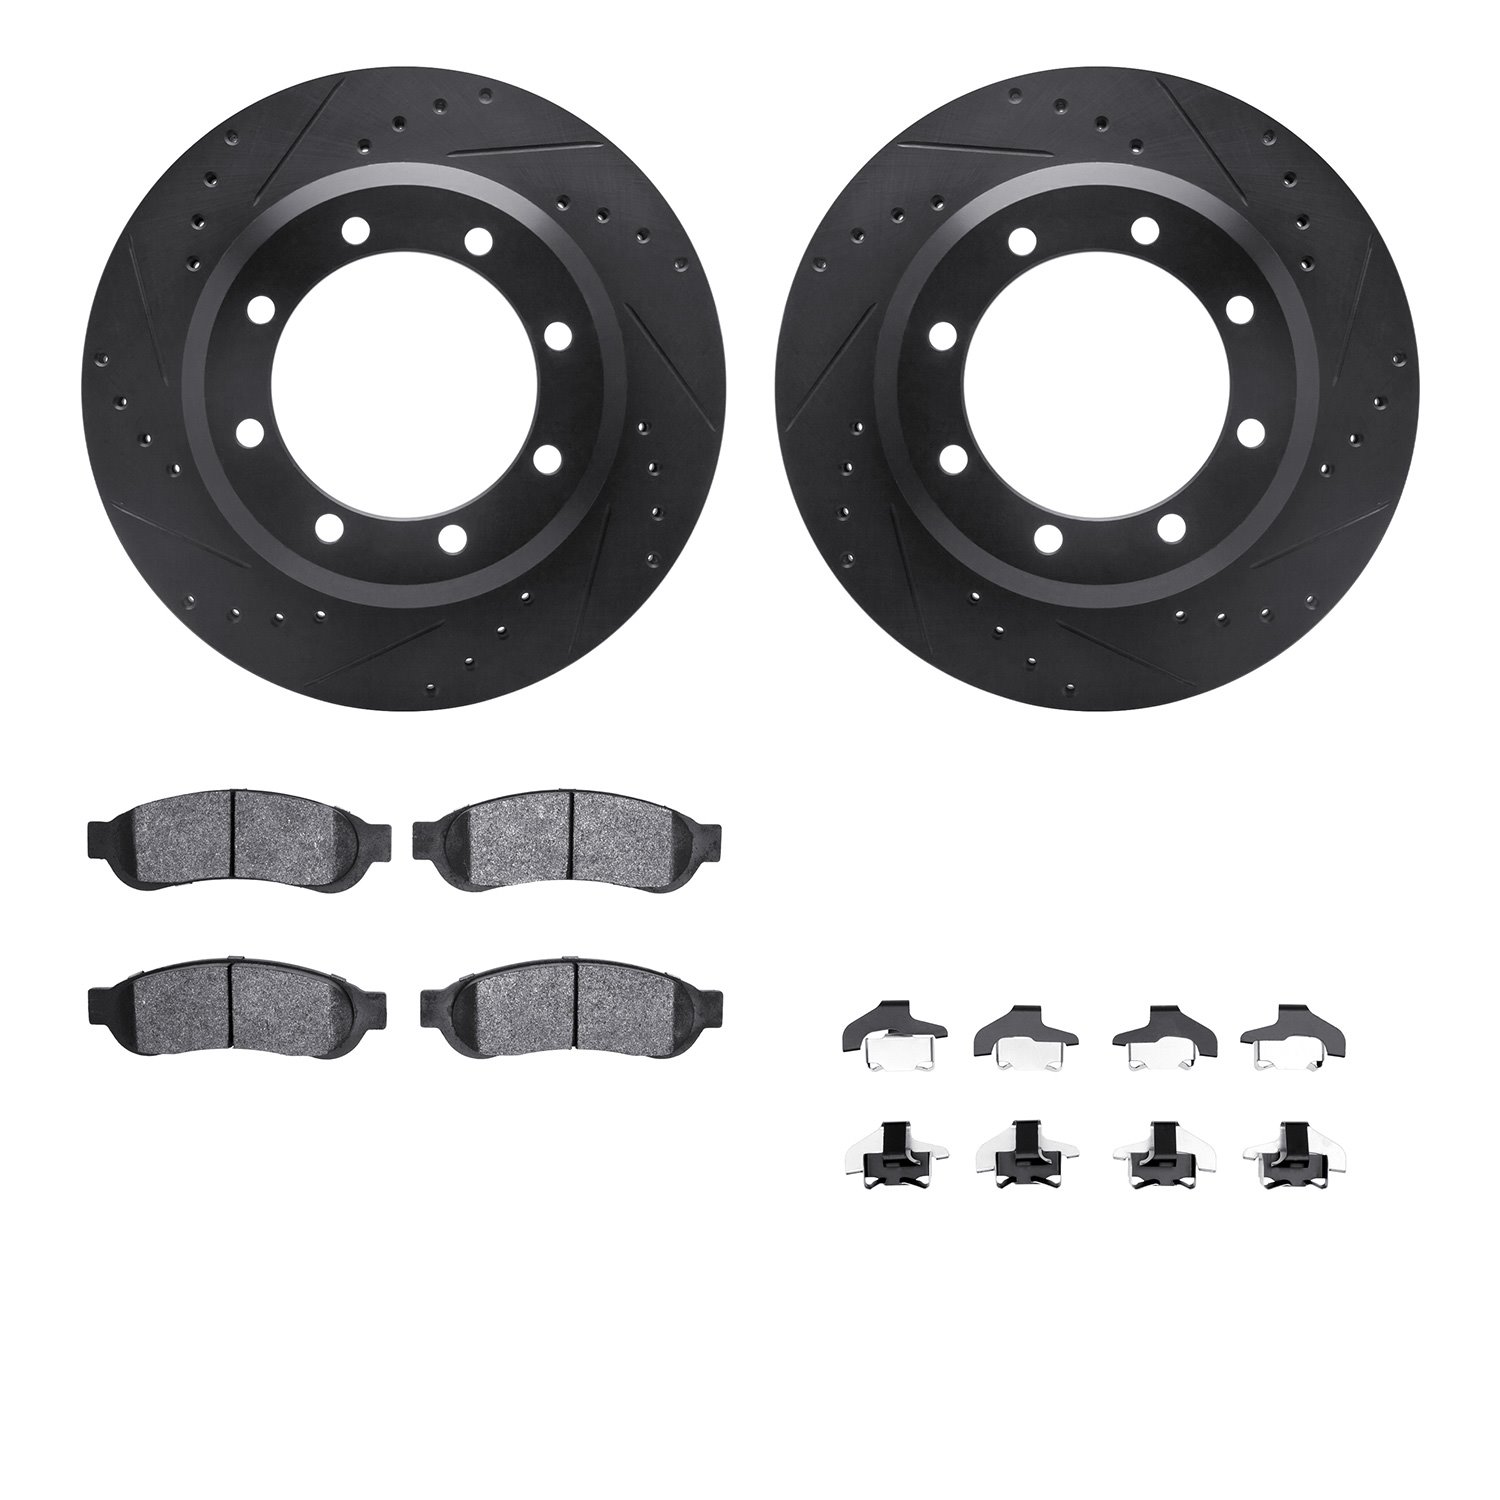 8412-54086 Drilled/Slotted Brake Rotors with Ultimate-Duty Brake Pads Kit & Hardware [Black], 2005-2010 Ford/Lincoln/Mercury/Maz